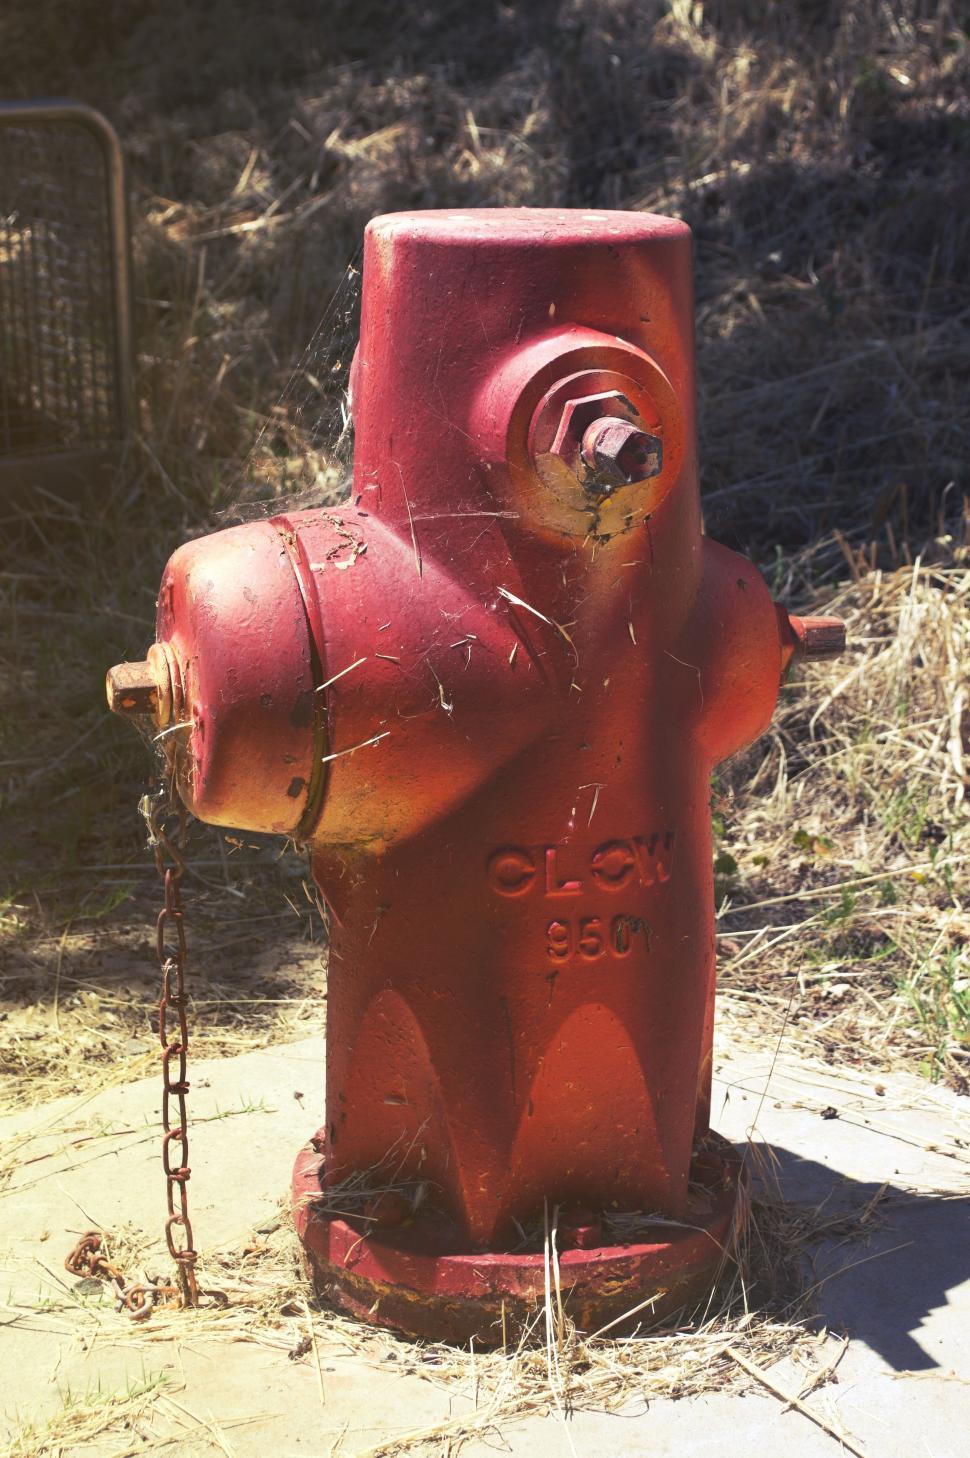 Free Image of Fire hydrant 